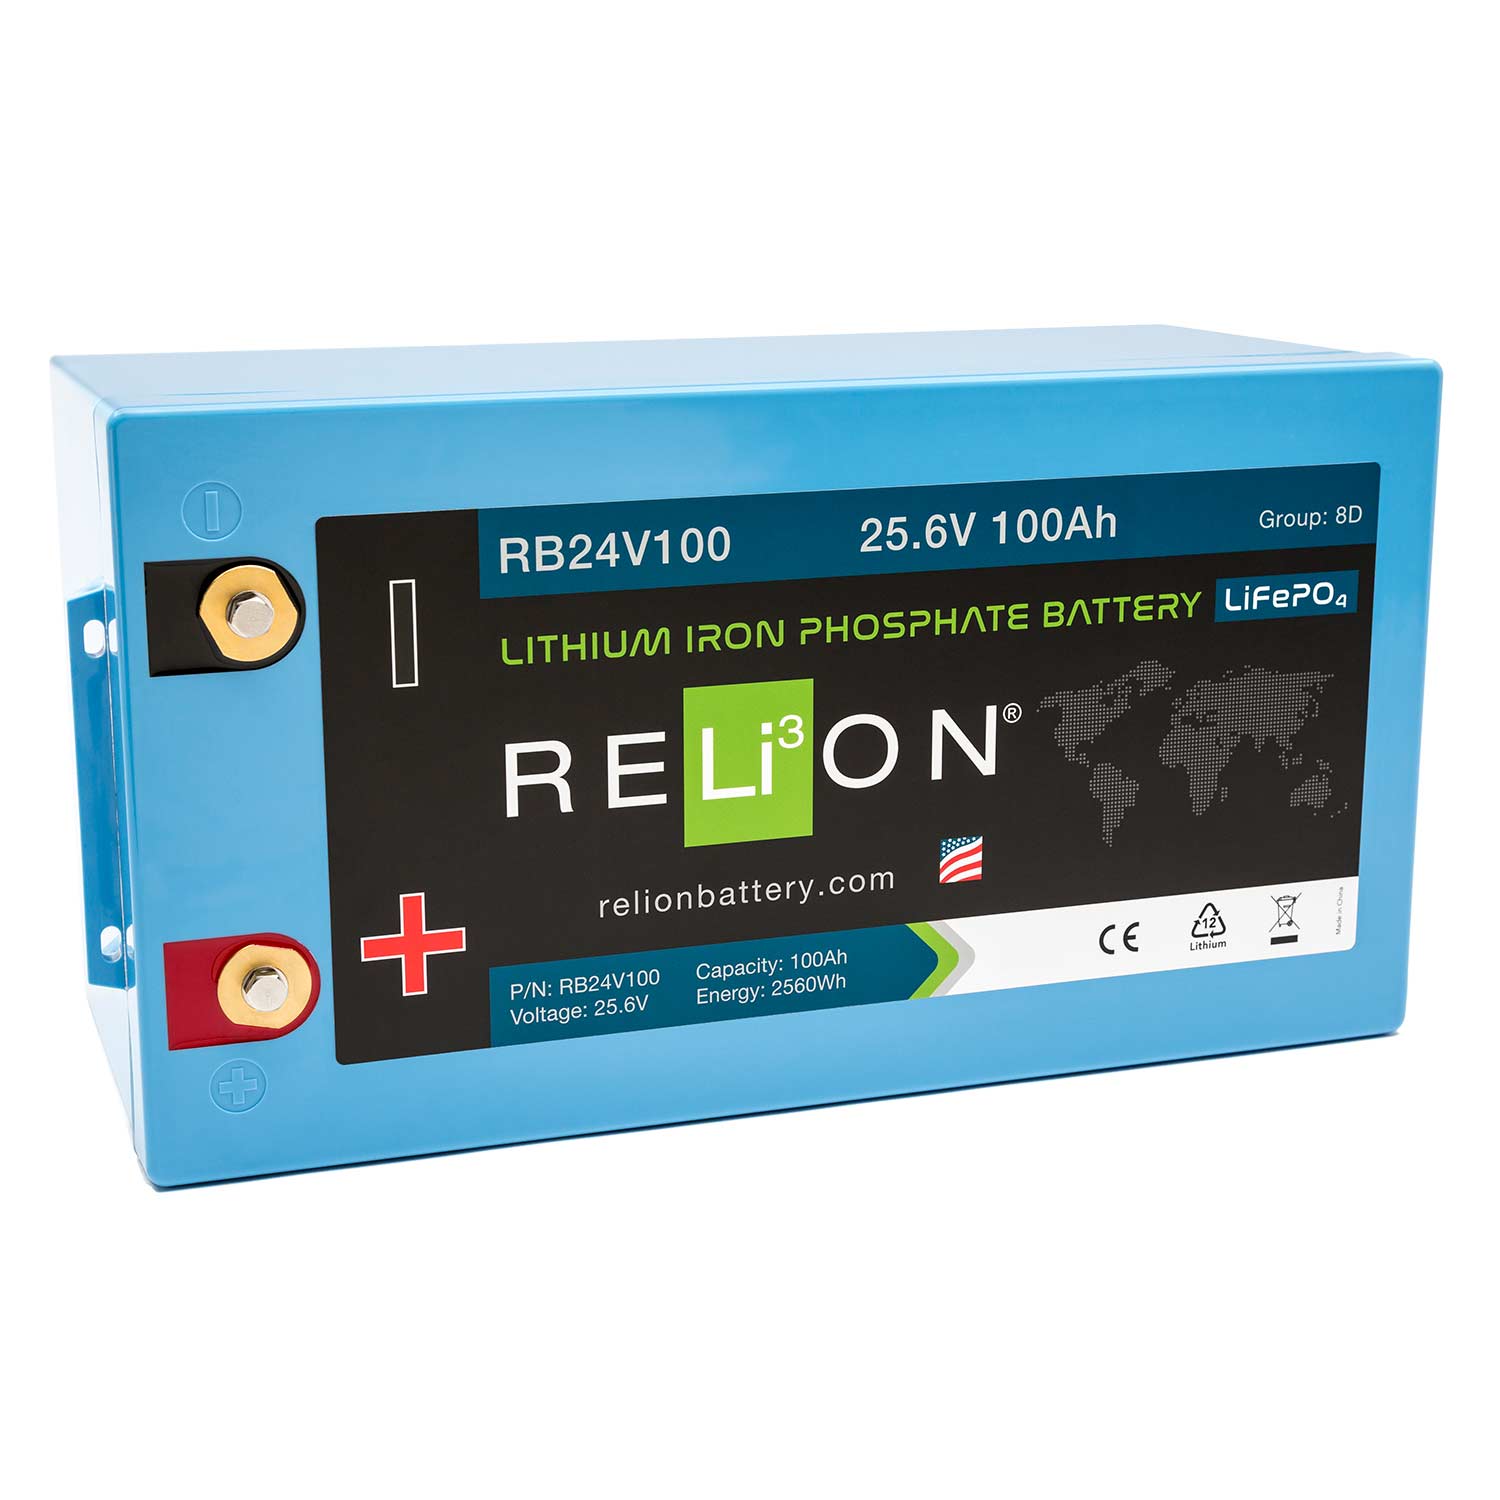 RELION Group 8D RB24V100 Lithium Iron Phosphate Deep Cycle Battery, 24V,  100Ah